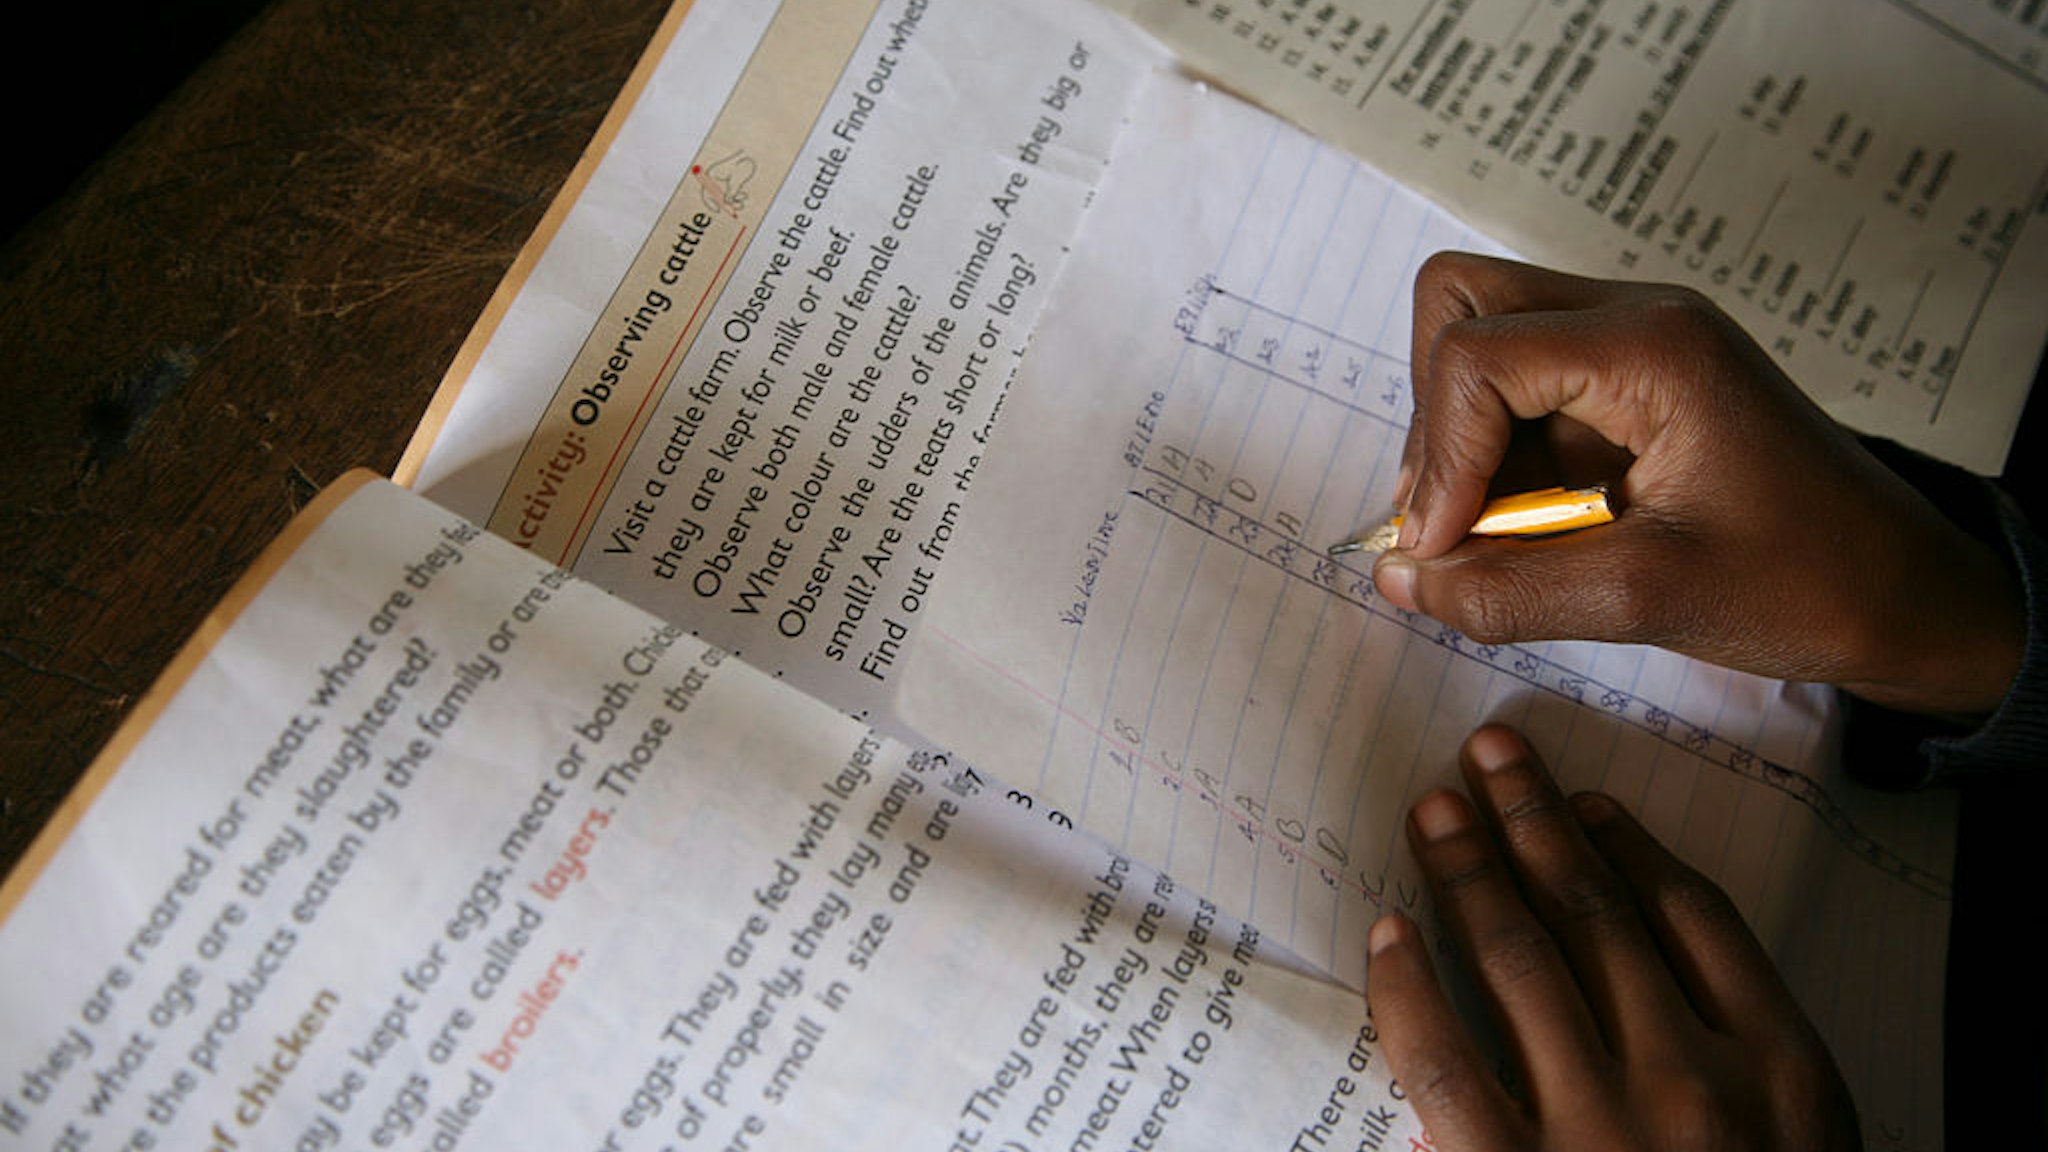 A student writes exams and homework in a classroom at KICOSHEP, the Kibera Community Self Help Program, a grass roots organization that assists children living in the slums, AIDS orphans and destitute children without a family.. More than half of the country's 32 million people are poor and 7.5 million of the poor live in extreme poverty. An estimated 750,000 people live in Kibera slum, a sprawling shantytown in the southern part of the capital city. Lack of a functioning sanitation and drainage system is perhaps the greatest threat to human health. Kibera is just one of Nairobi?s 199 slums. More than 1.6 million people live in these slums, which are often referred to as ?informal settlements?. All of the slums surrounding Nairobi have frequent outbreaks of cholera, typhoid and other water borne diseases.Slums have no sanitation facilities or flush toilets.